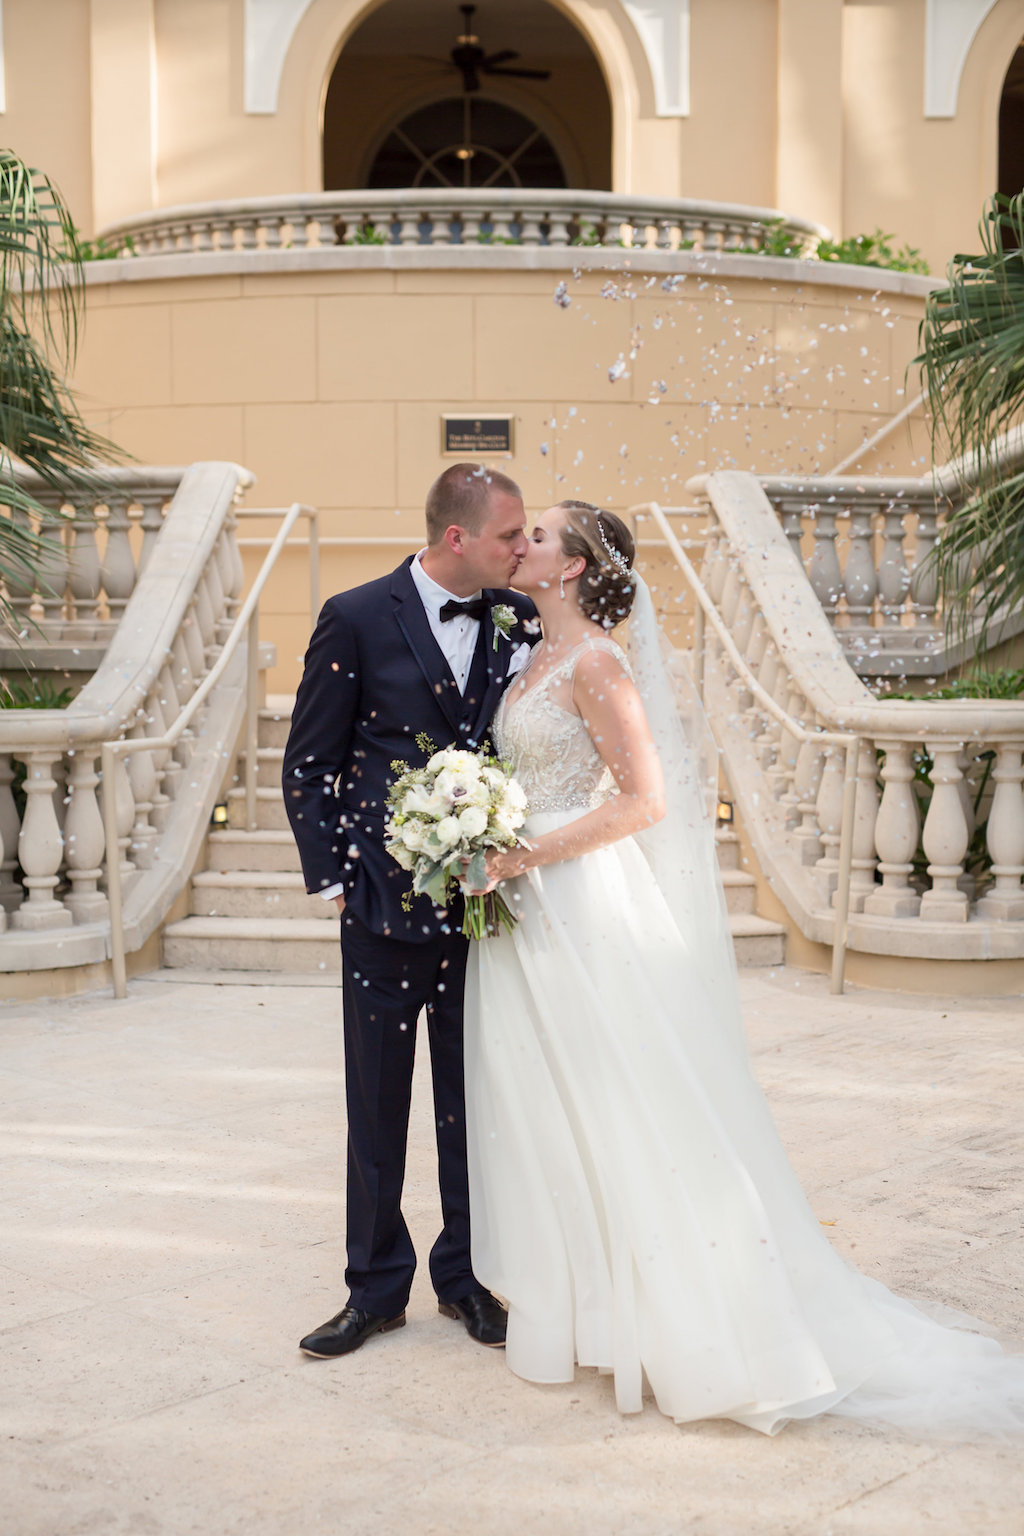 Outdoor Hotel Garden Wedding Ceremony Portrait, Bride in A Line WEdding Dress with White Rose and Greenery Bouquet, Groom in Navy Suit | Sarasota Wedding Photographer Cat Pennenga Photography | Downtown Venue The Ritz Carlton